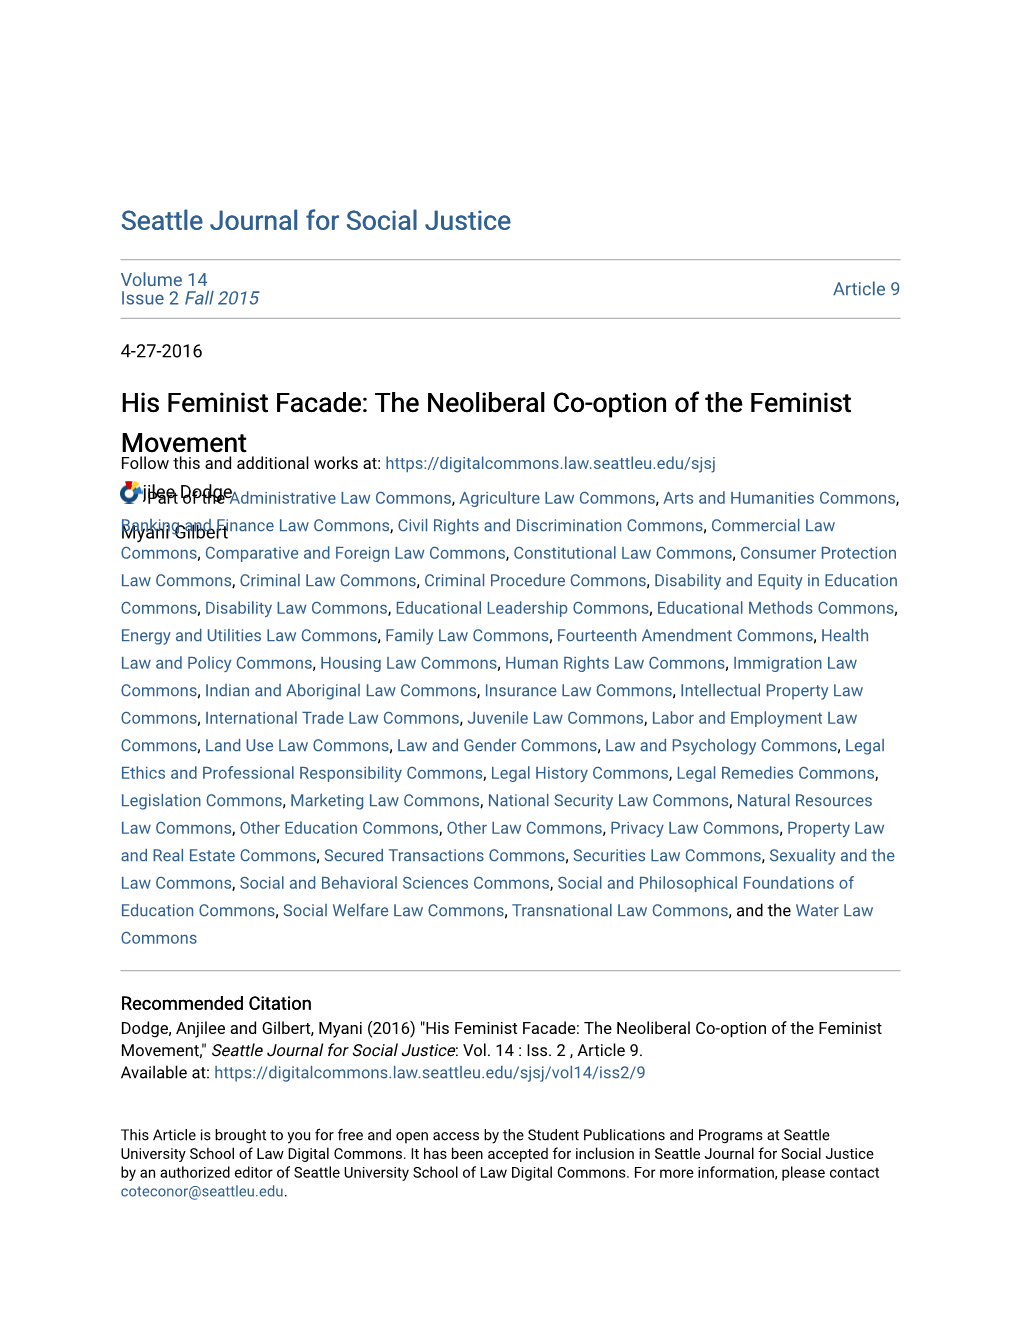 His Feminist Facade: the Neoliberal Co-Option of the Feminist Movement Follow This and Additional Works At